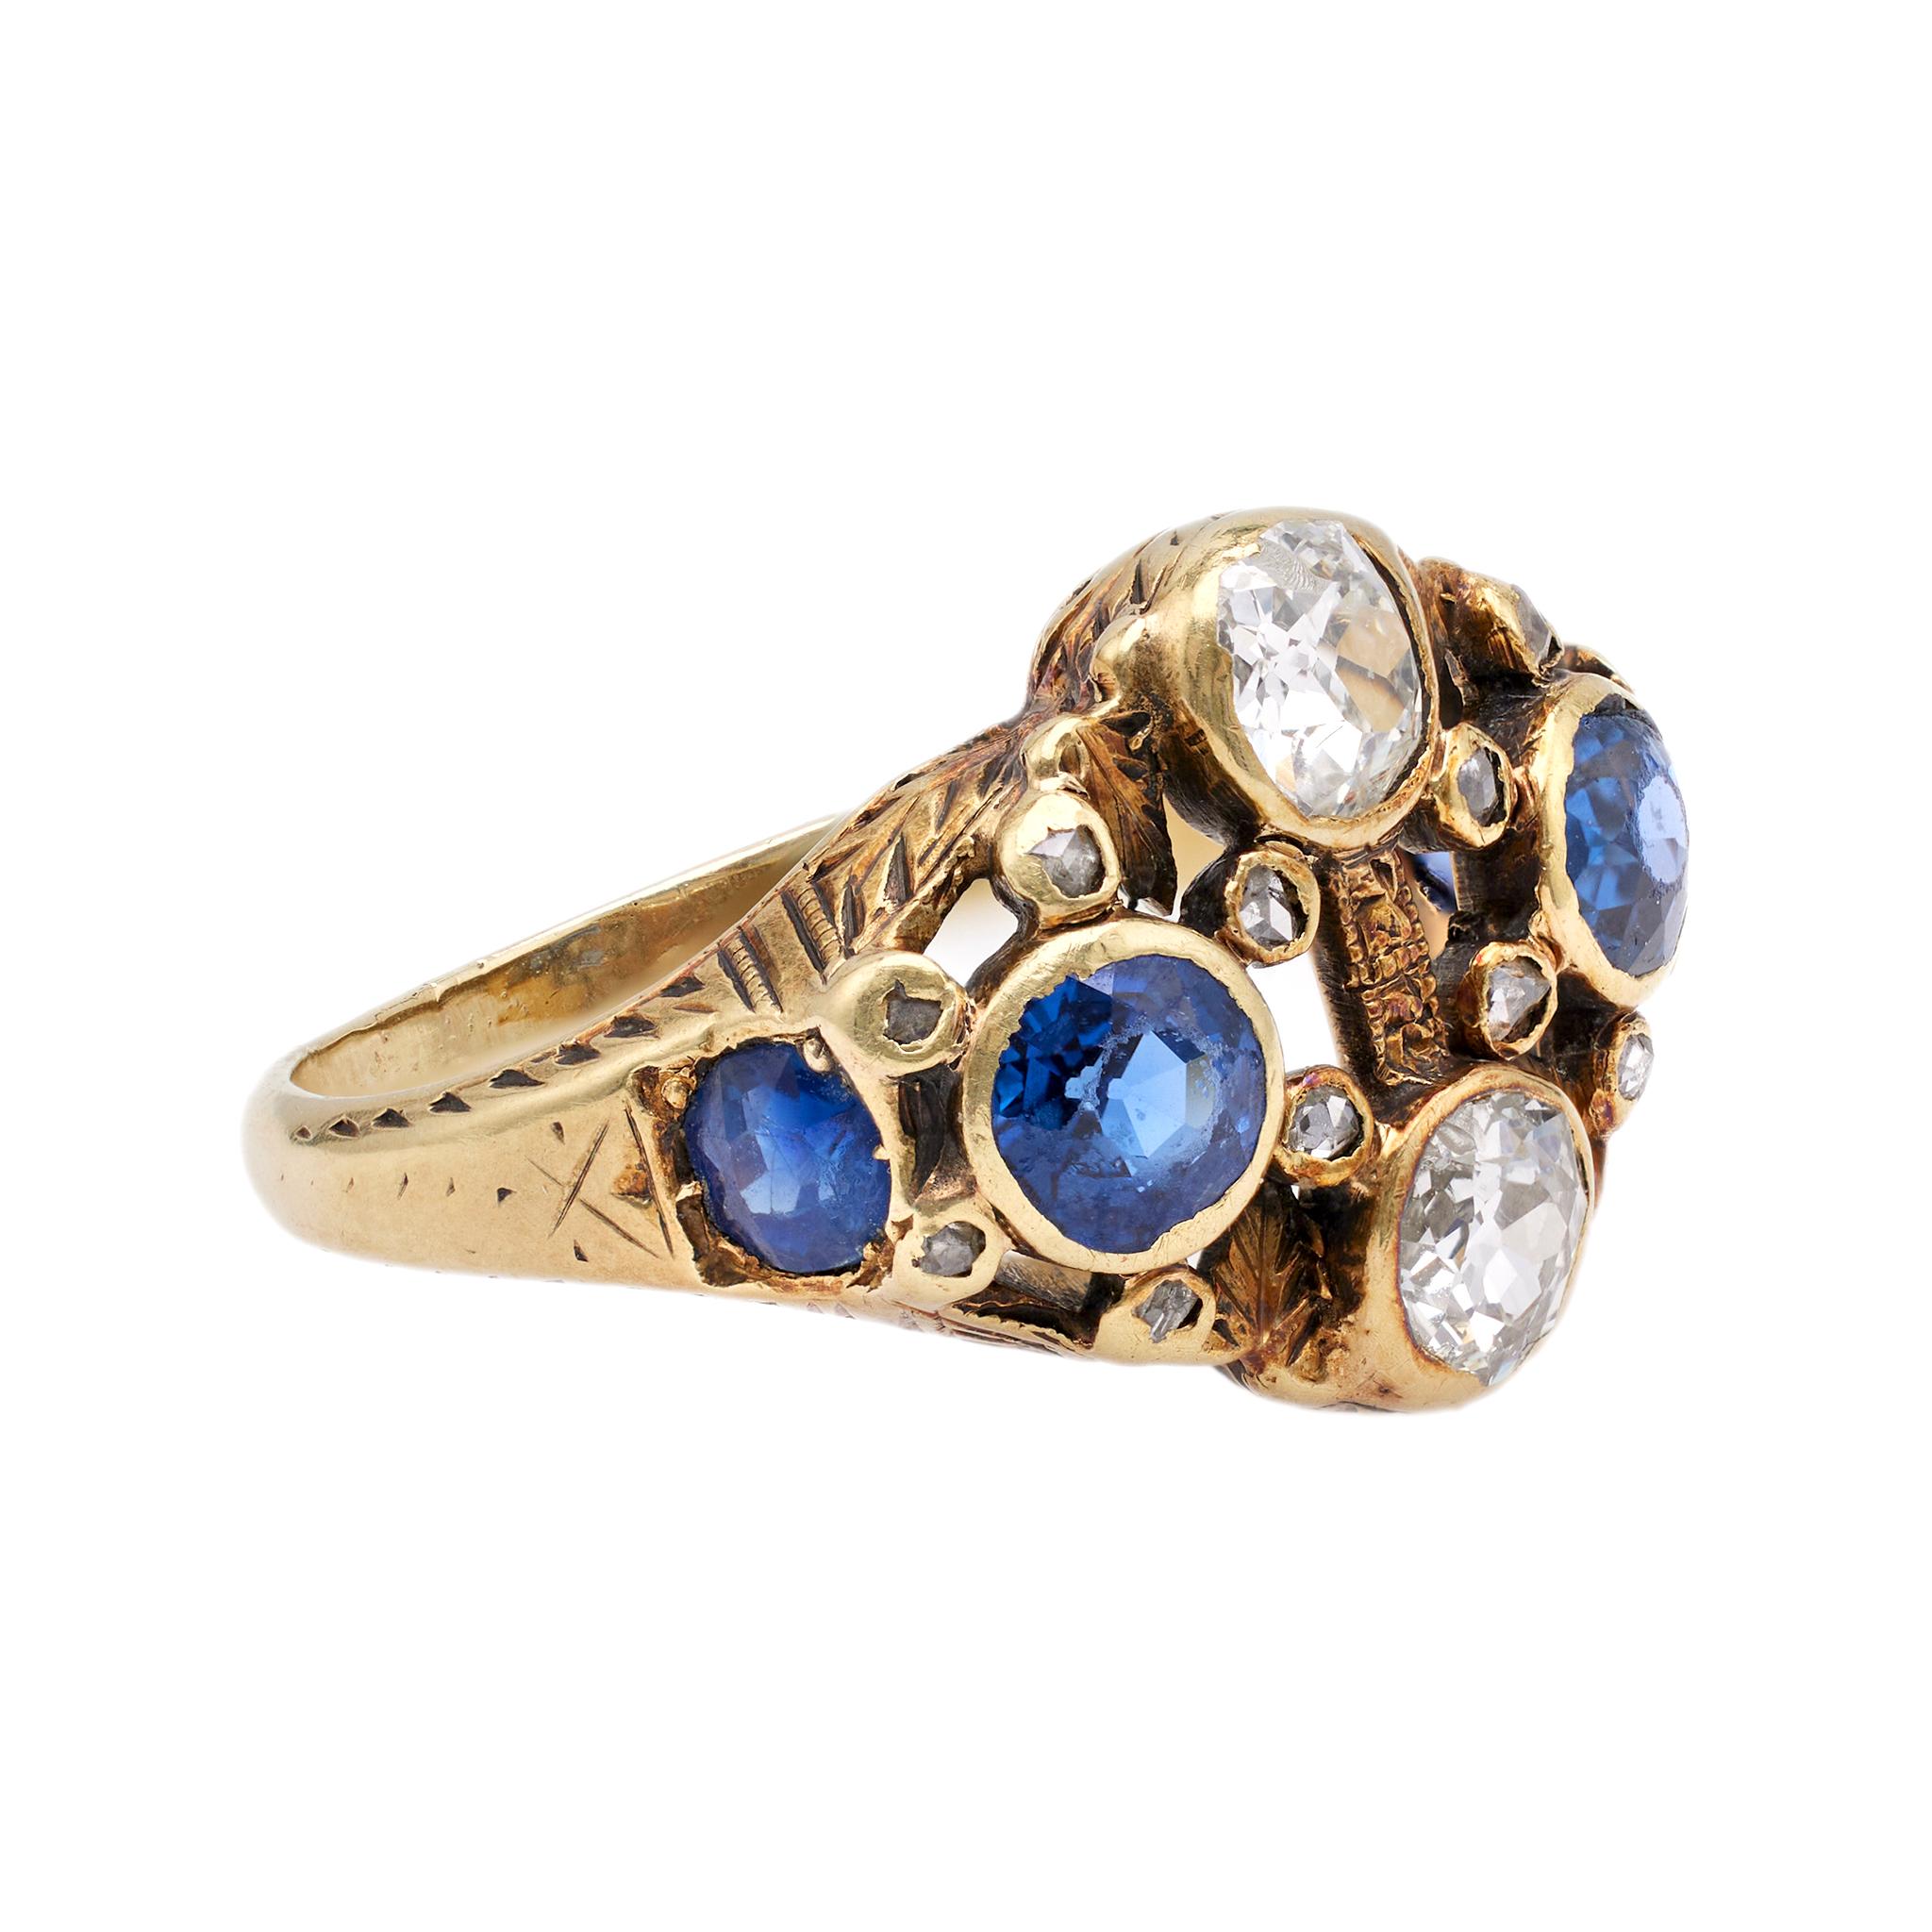 One Antique French Diamond and Synthetic Sapphire 14k Yellow Gold Ring. Featuring two old mine cut diamonds with a total weight of approximately 0.70 carat, graded H-I color, I1 clarity, and four cushion mixed cut synthetic sapphires with a total